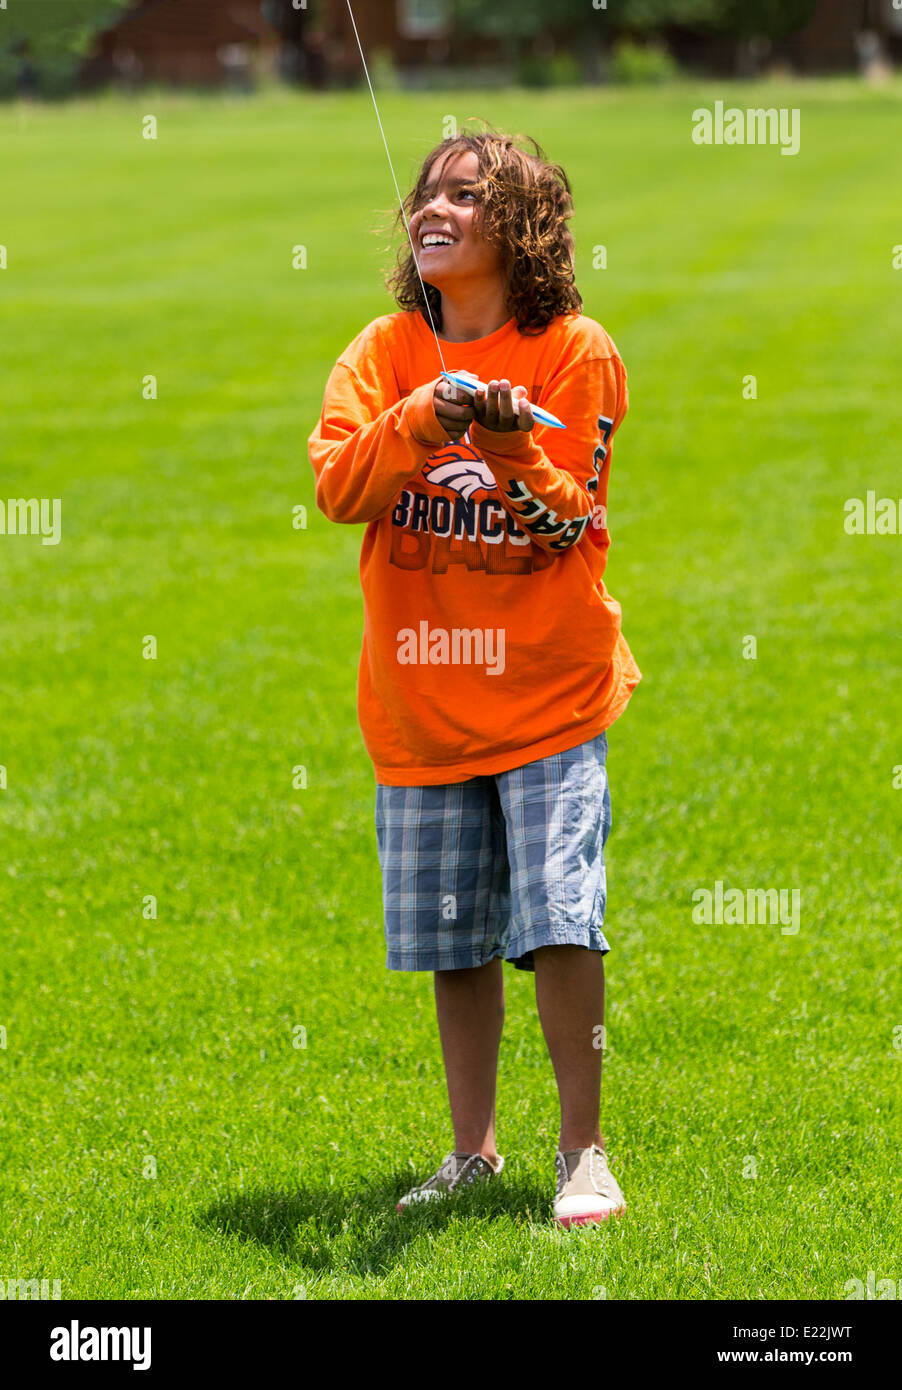 Young boy flying a kite on a grassy field Stock Photo